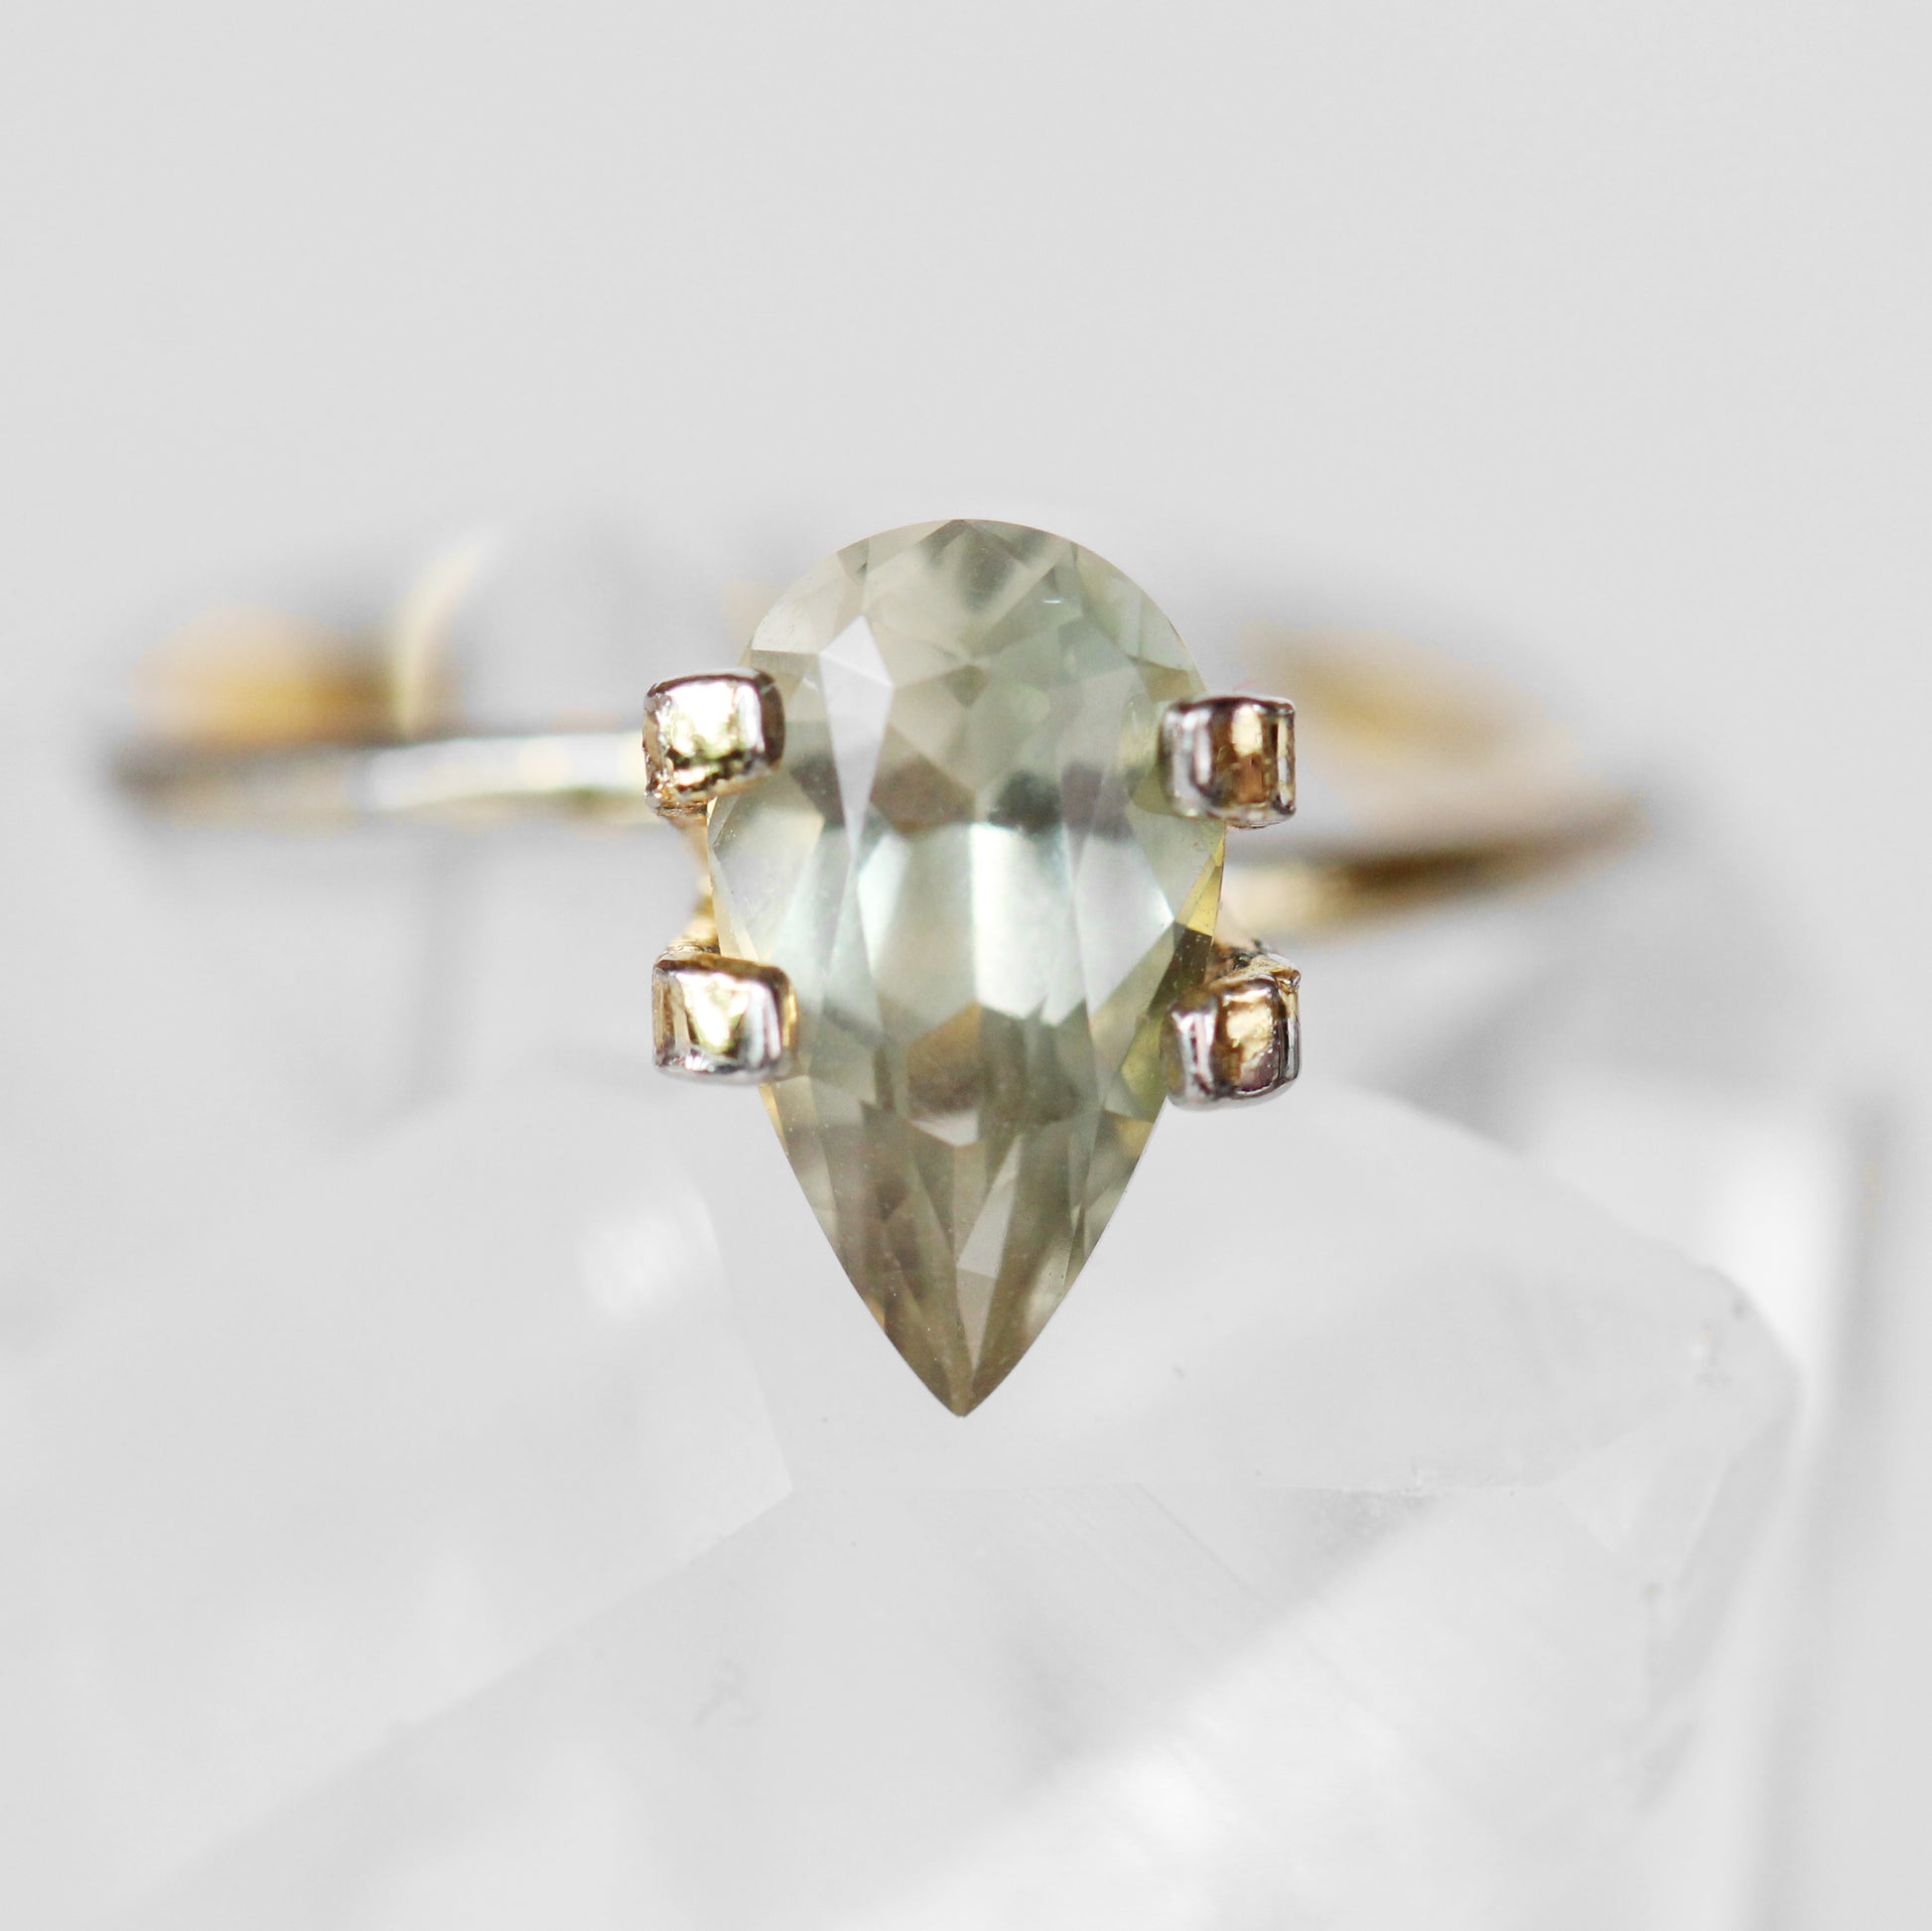 1.27ct Oregon Sunstone for Custom Work - Inventory Code SUN127 - Midwinter Co. Alternative Bridal Rings and Modern Fine Jewelry